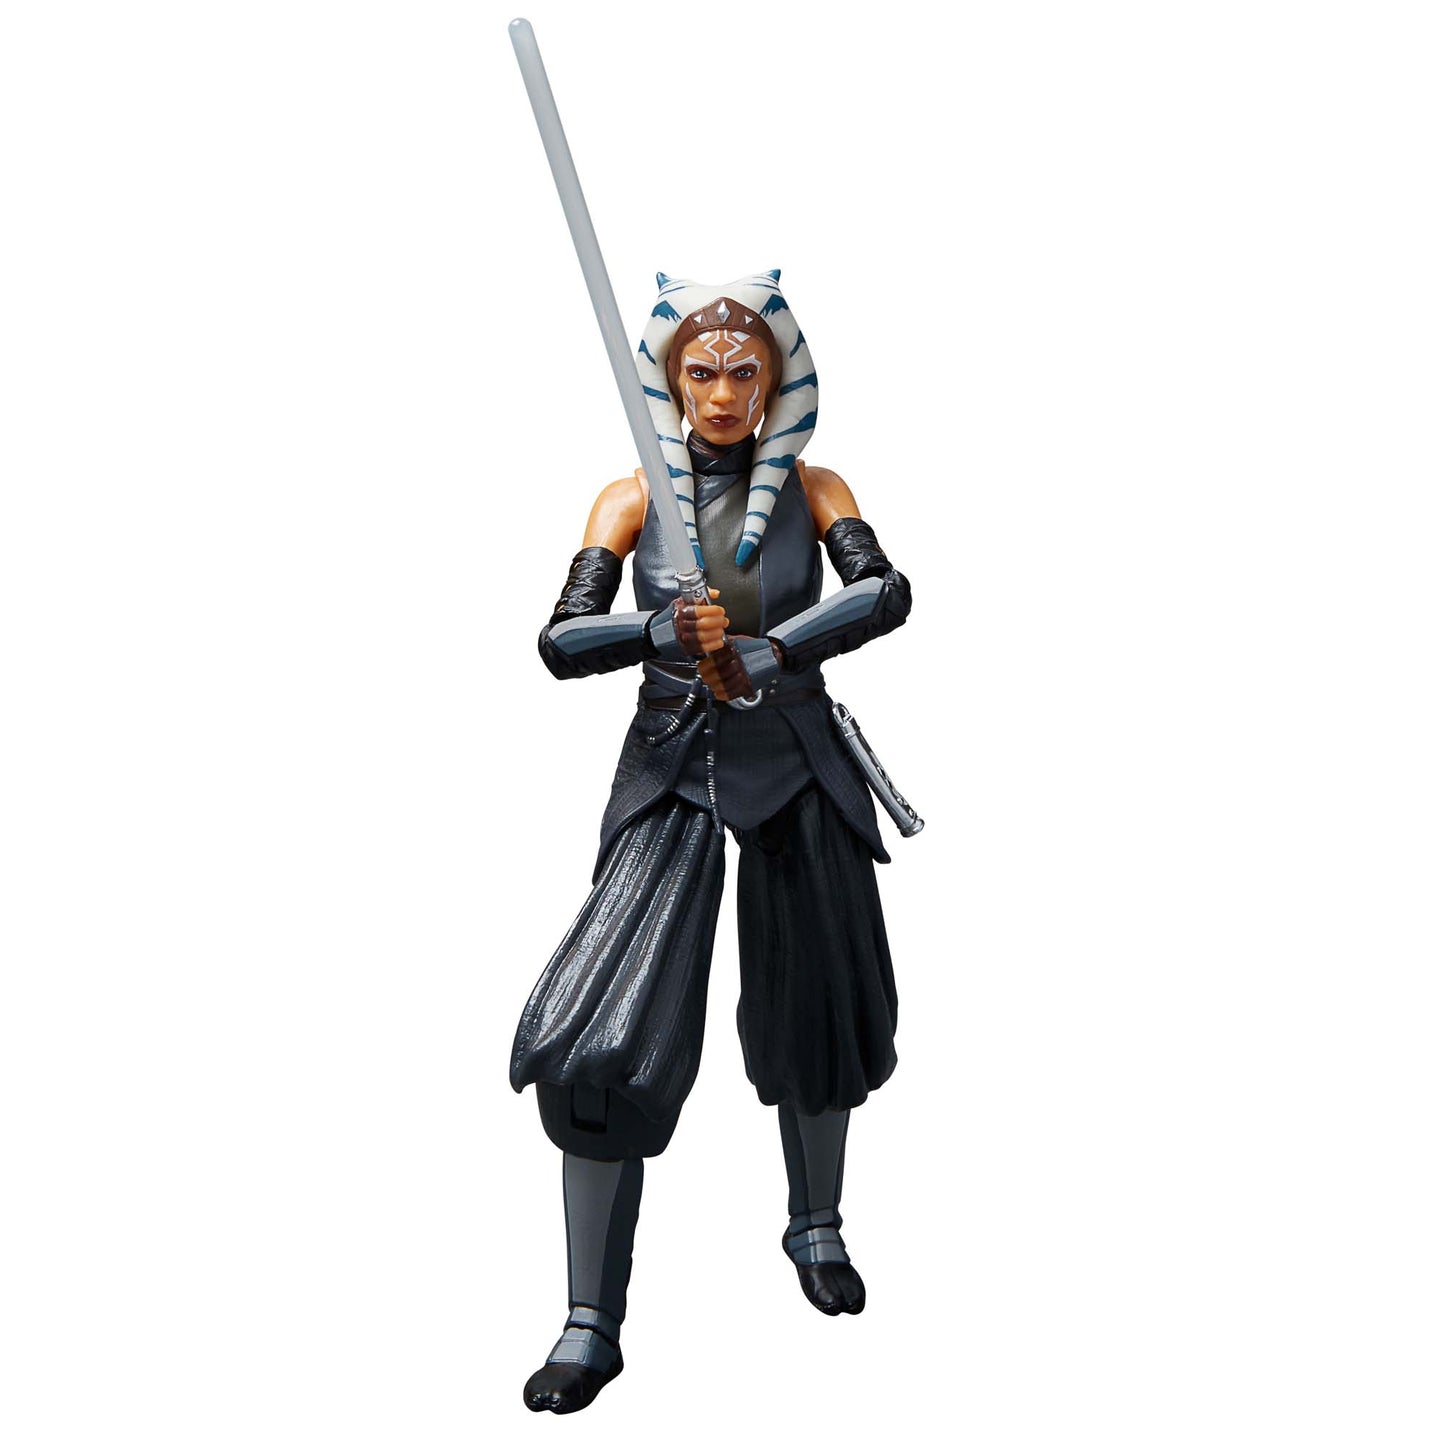 Star Wars The Black Series Ahsoka Tano Action Figure Toy with saber - heretoserveyou